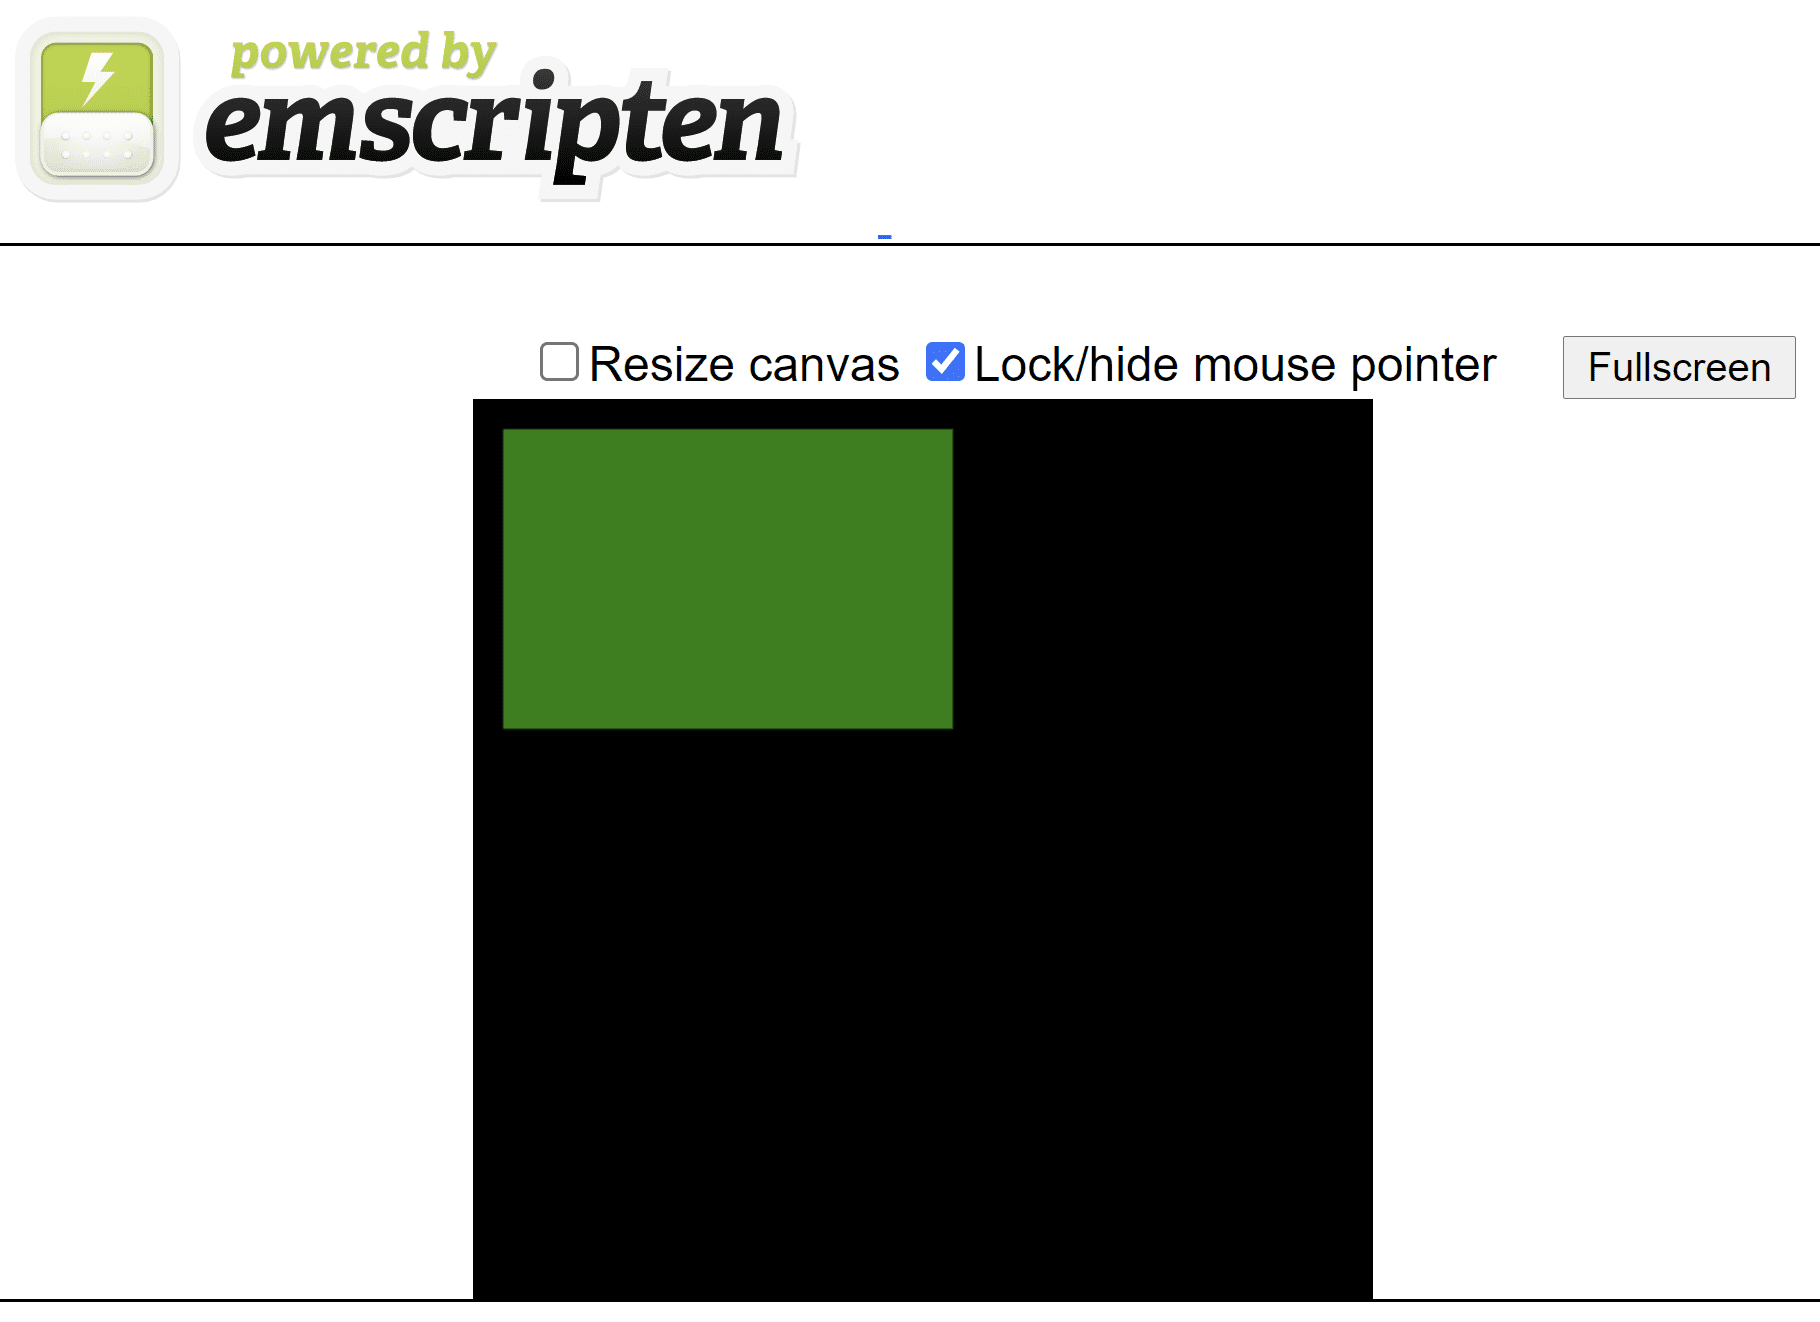 Emscripten-generated HTML page showing a green rectangle on a black square canvas.